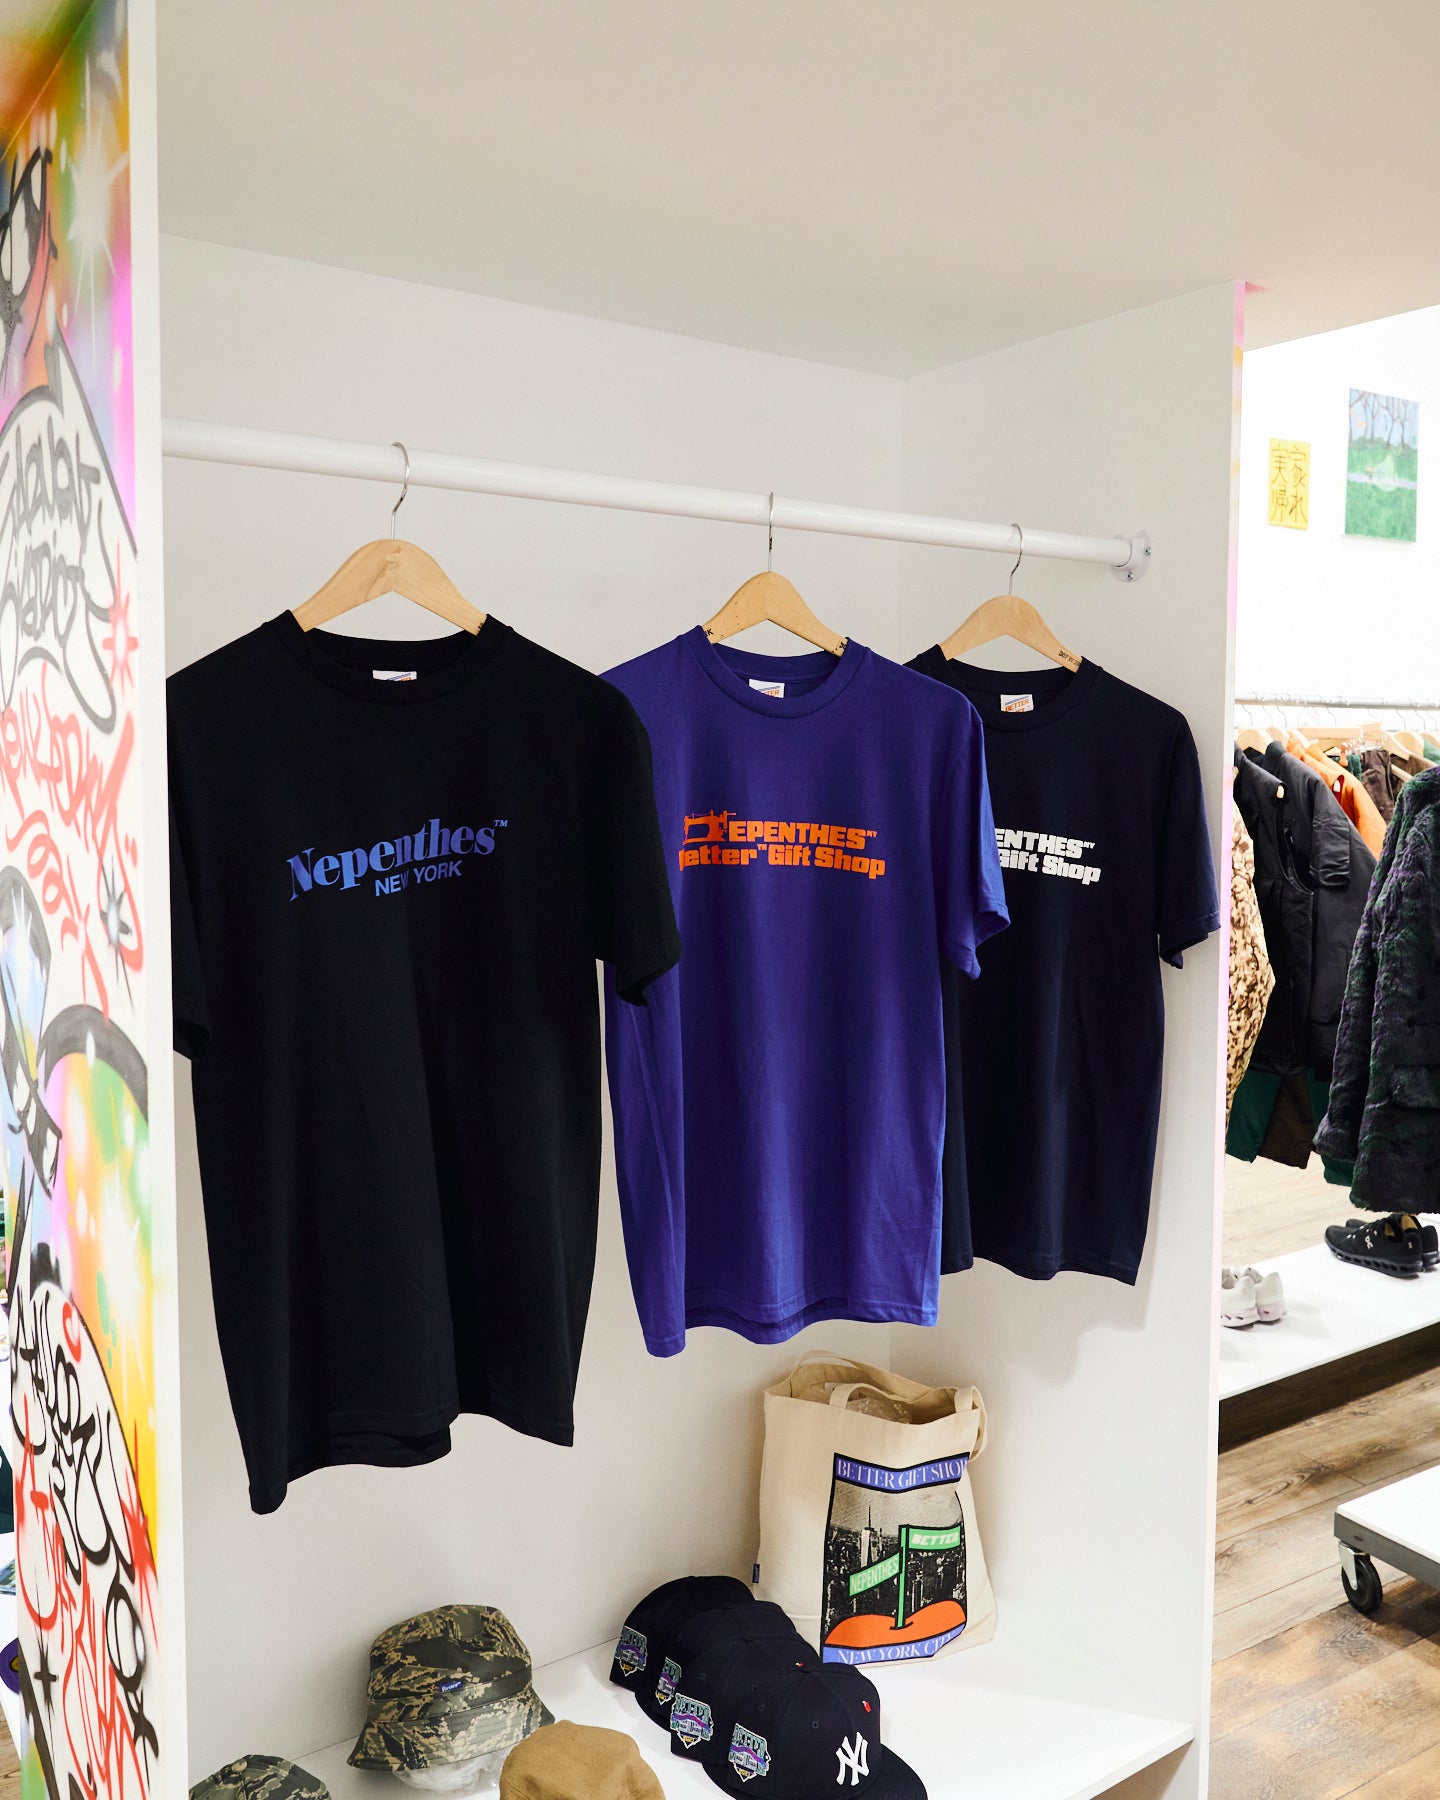 Nepenthes New York x Better™ Gift Shop - New Products